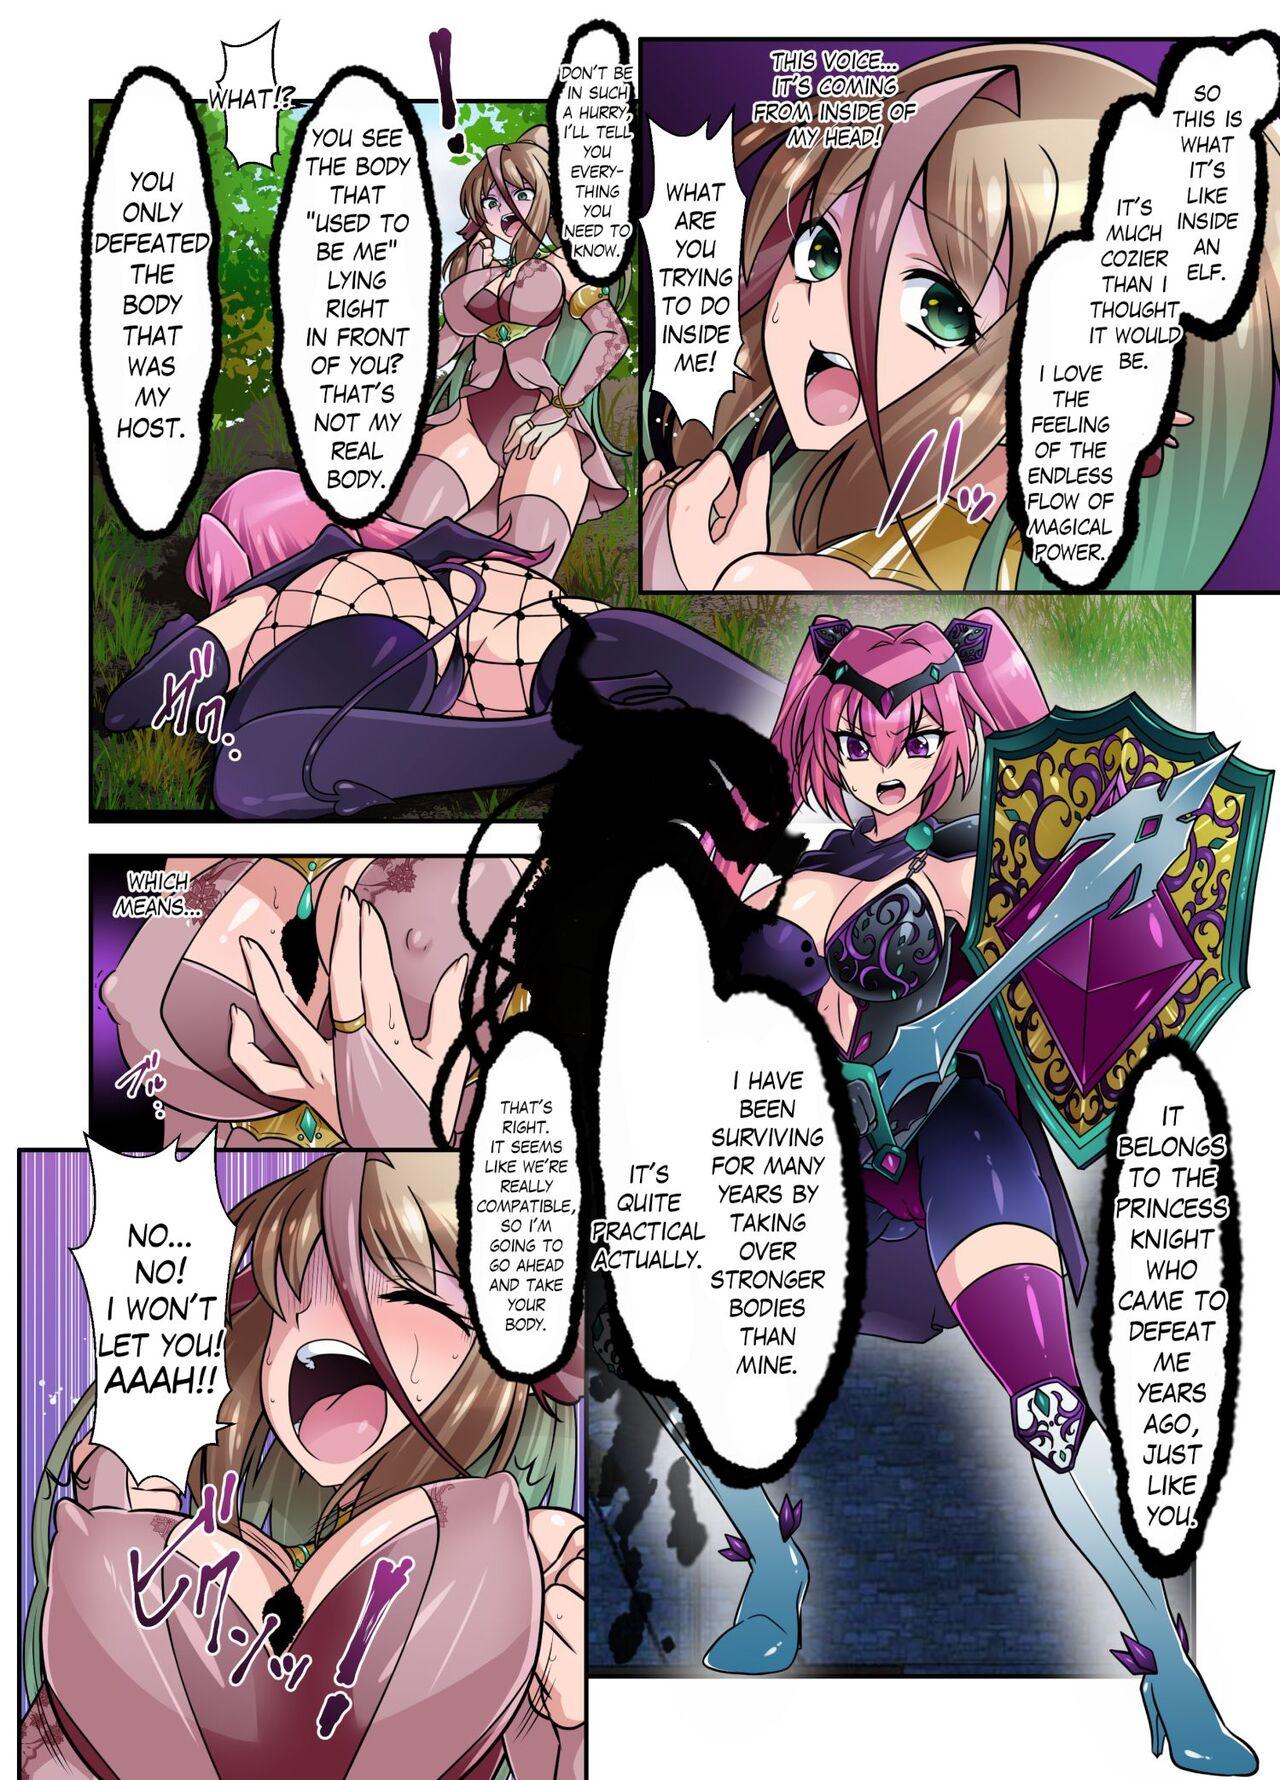 Elf Taken Over By Succubus 3